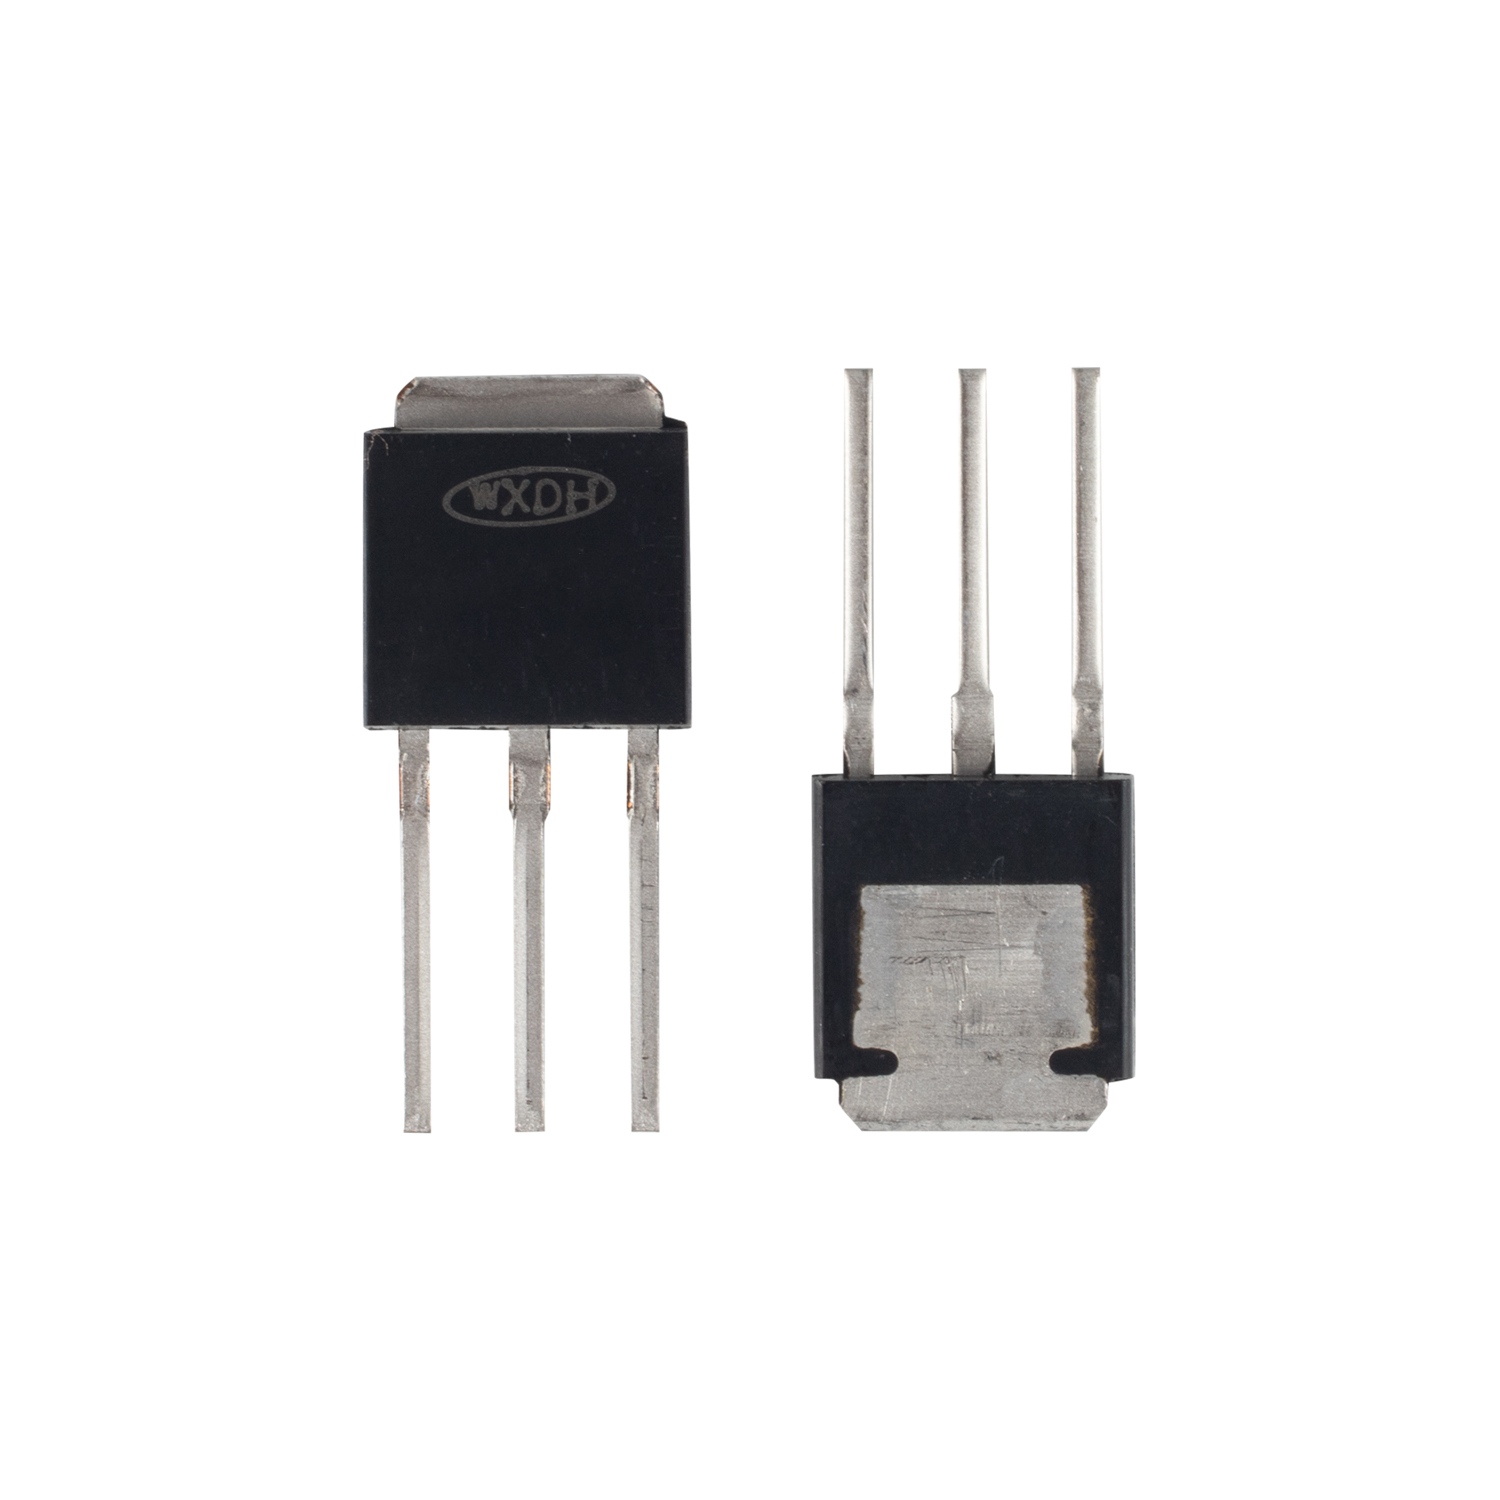 0.8A 600V N-channel Enhancement Mode Power MOSFET